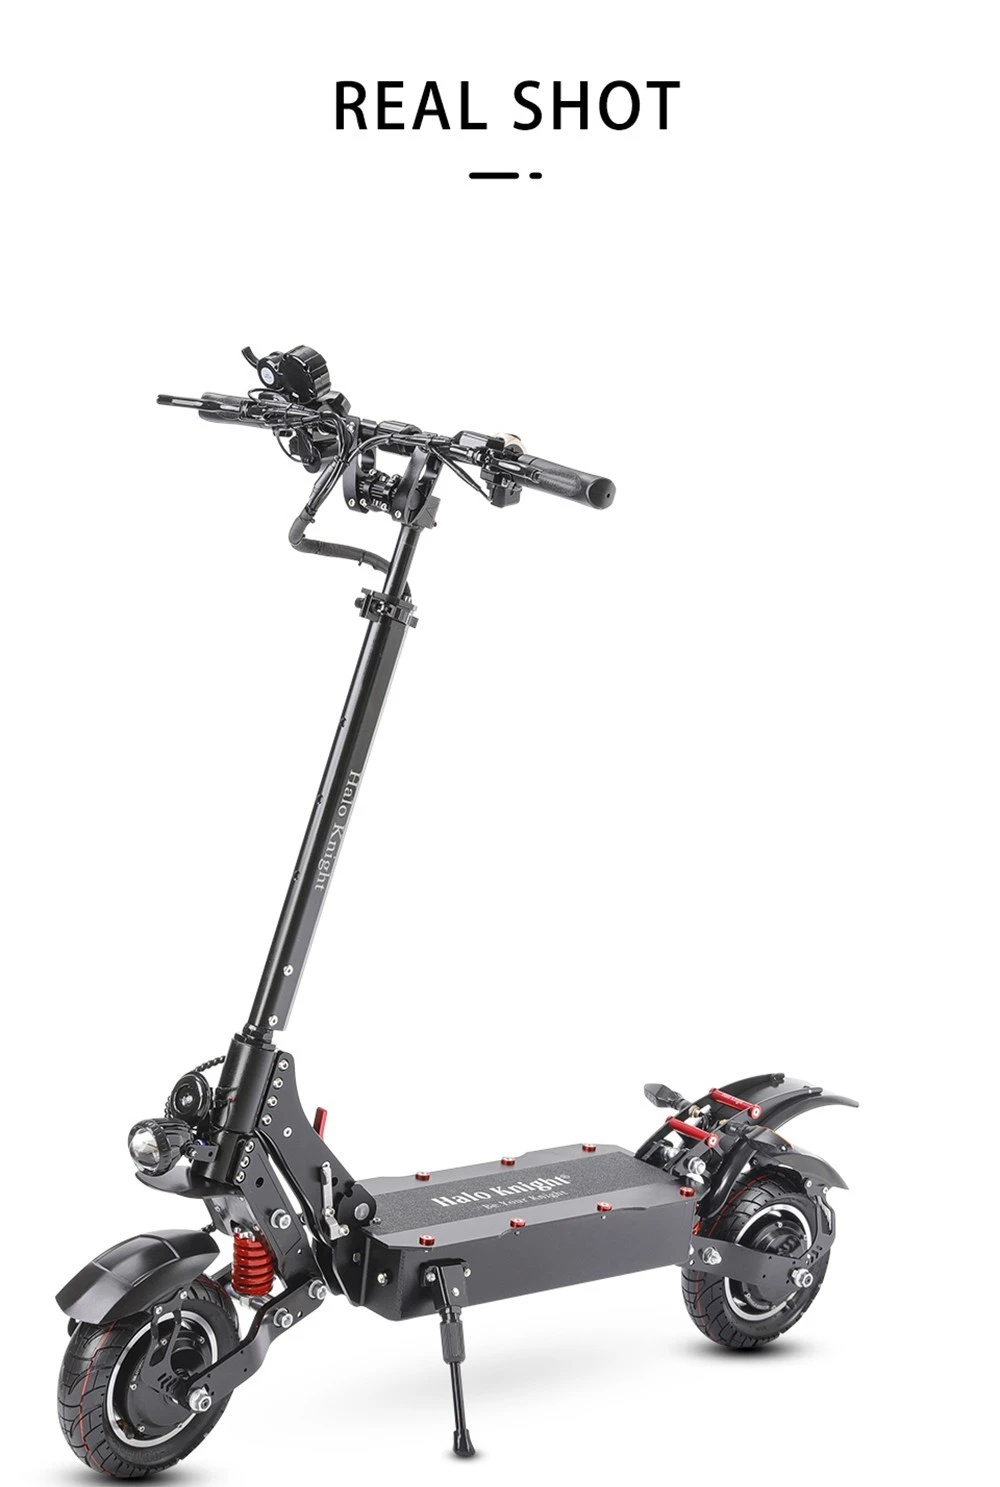 https://img.gkbcdn.com/d/202308/Halo-Knight-T108-Electric-Scooter-10-inch-Road-Tires-521959-19._p1_.jpg